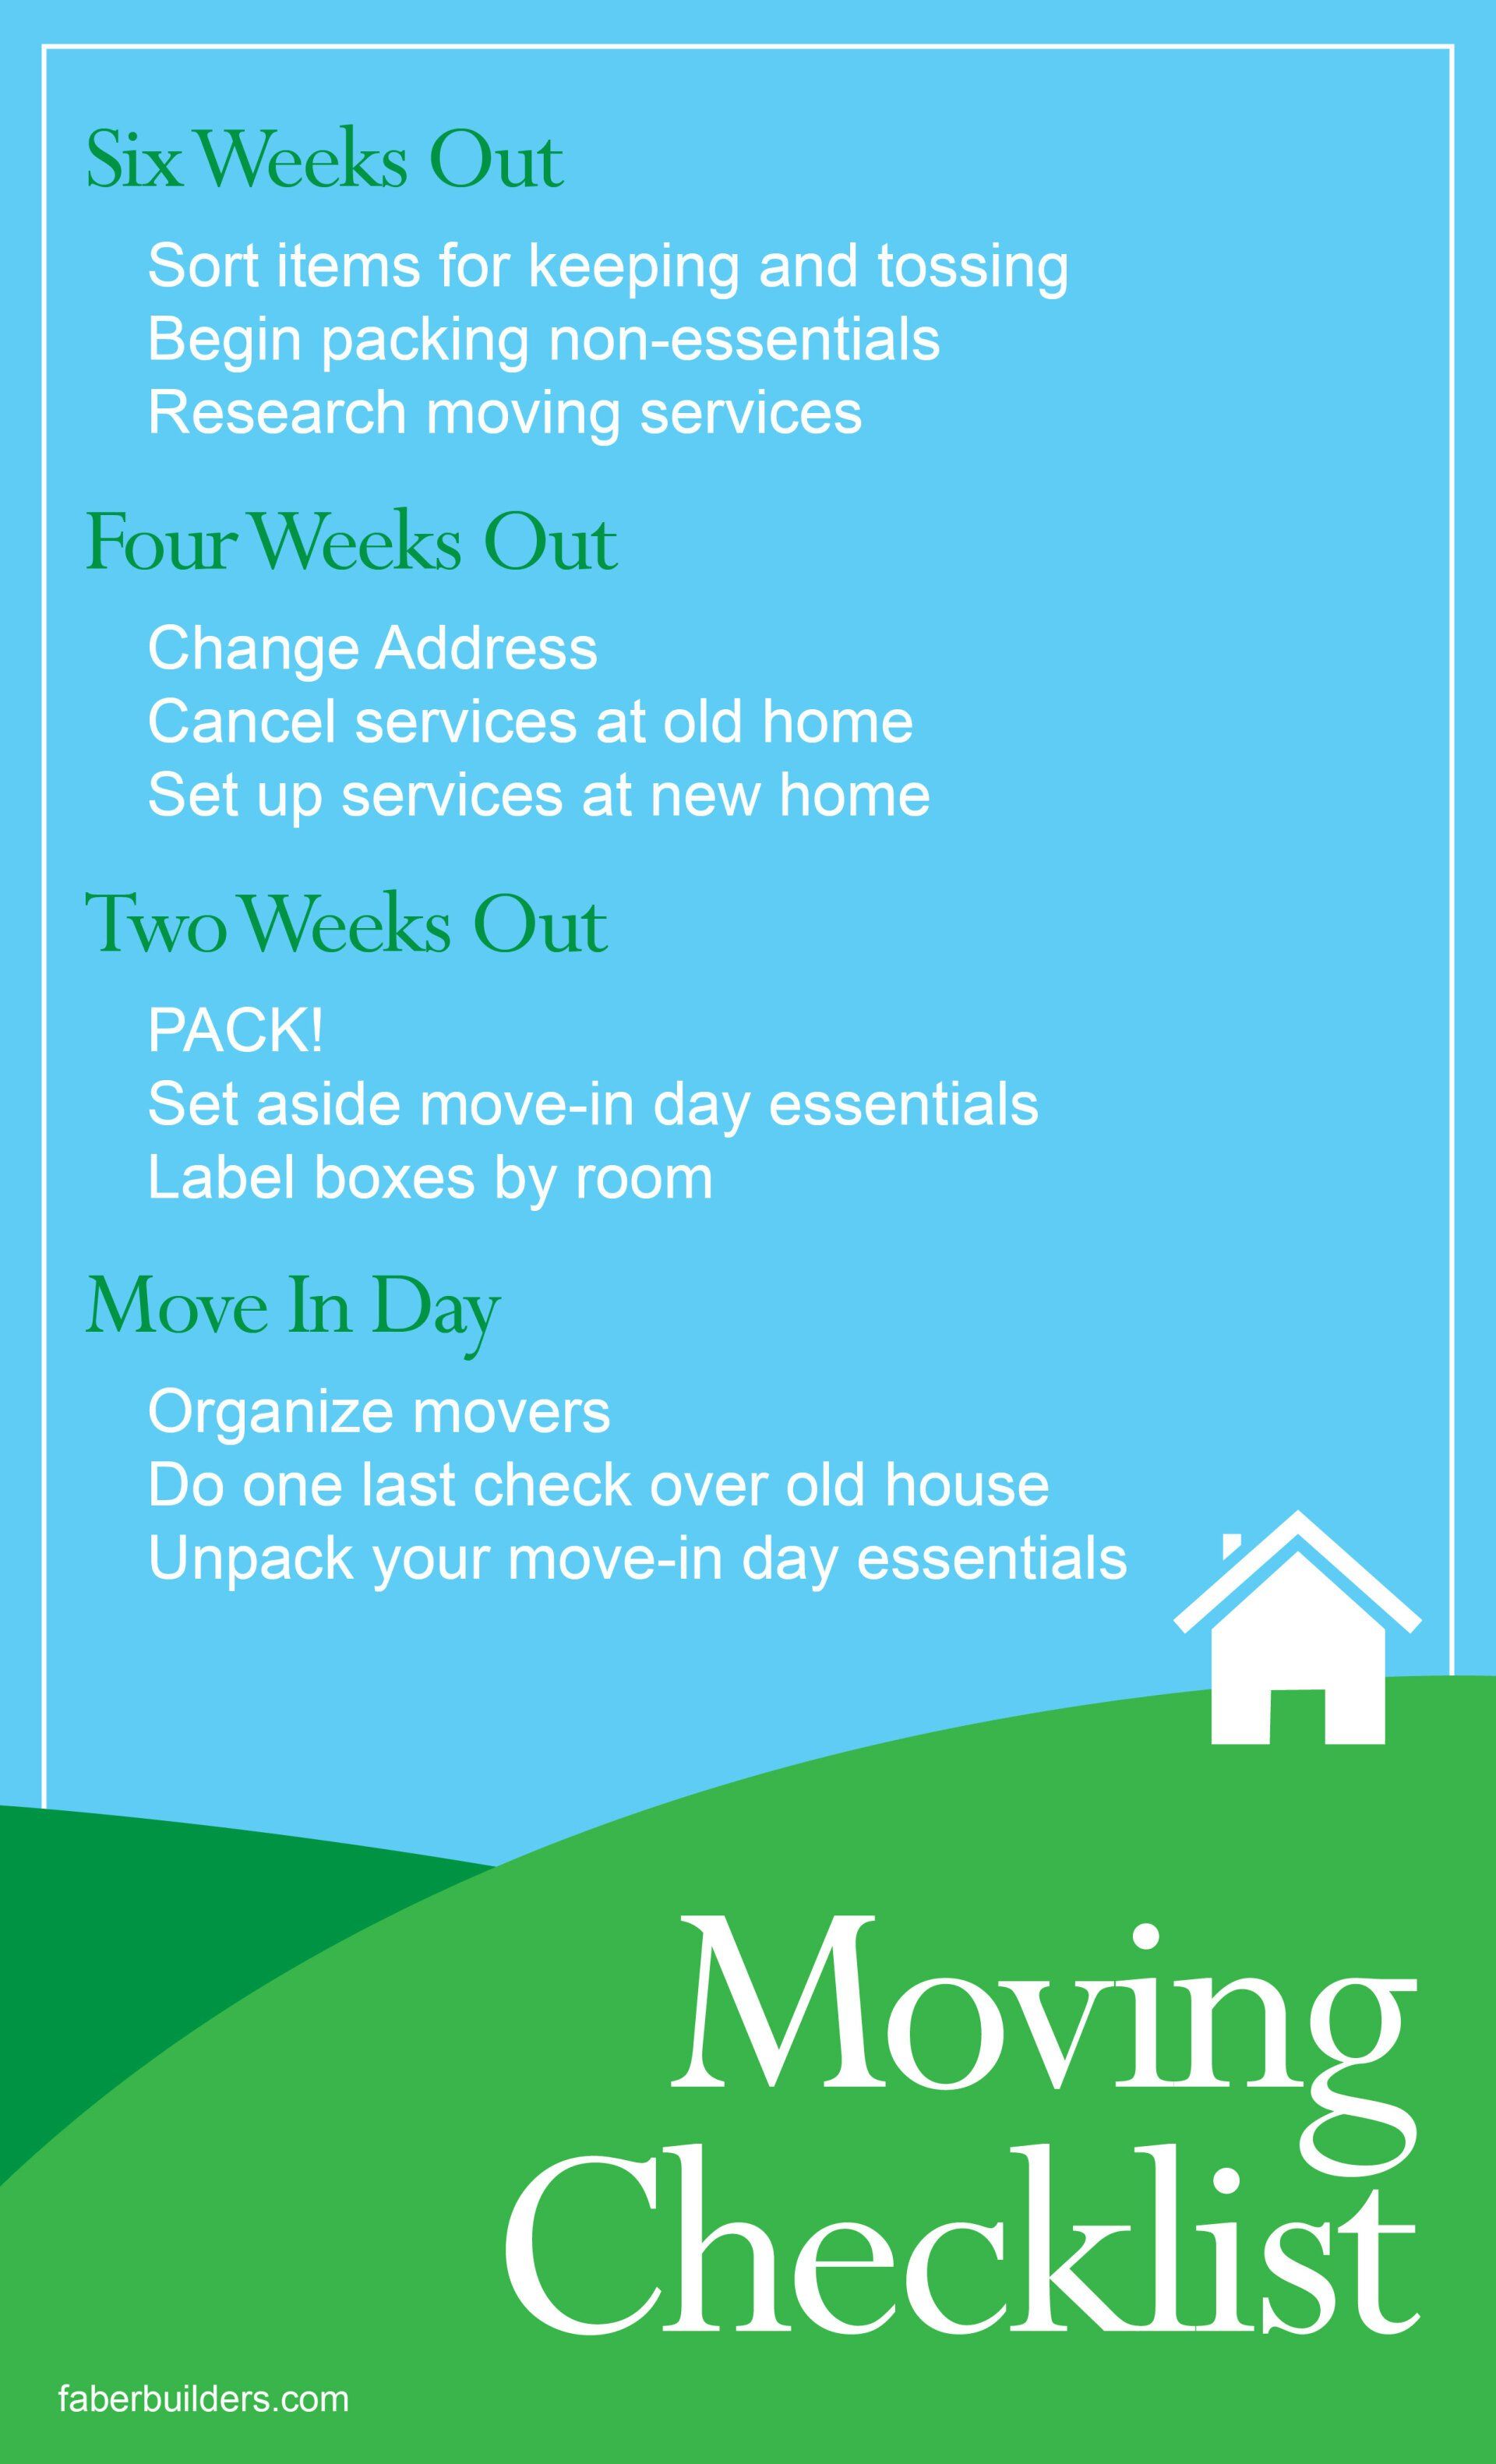 Take a look at our Moving Checklist